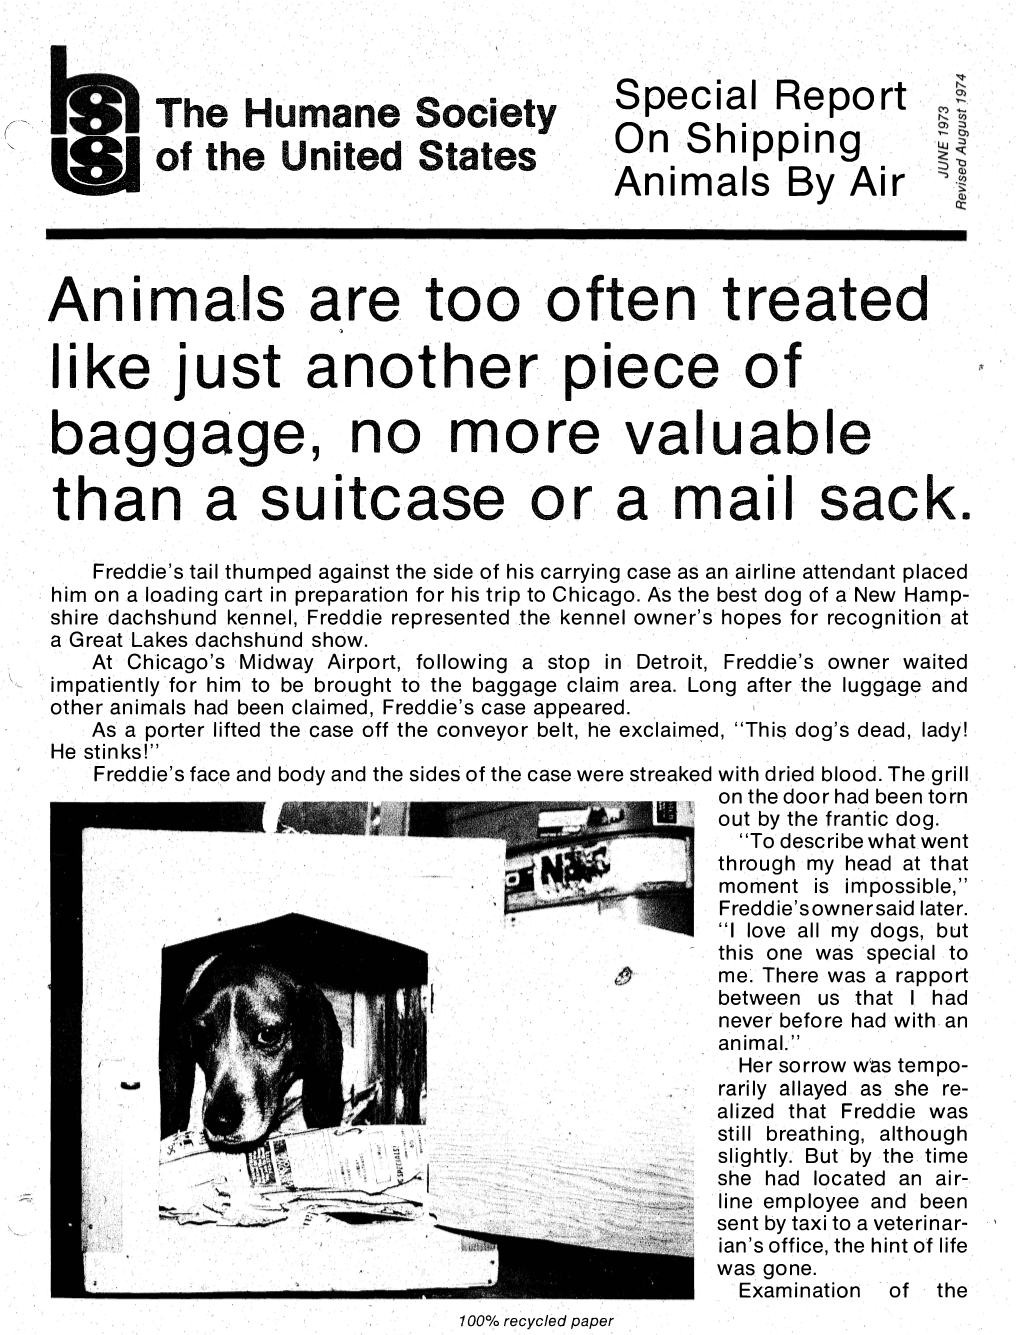 Special Report on Shipping Animals By